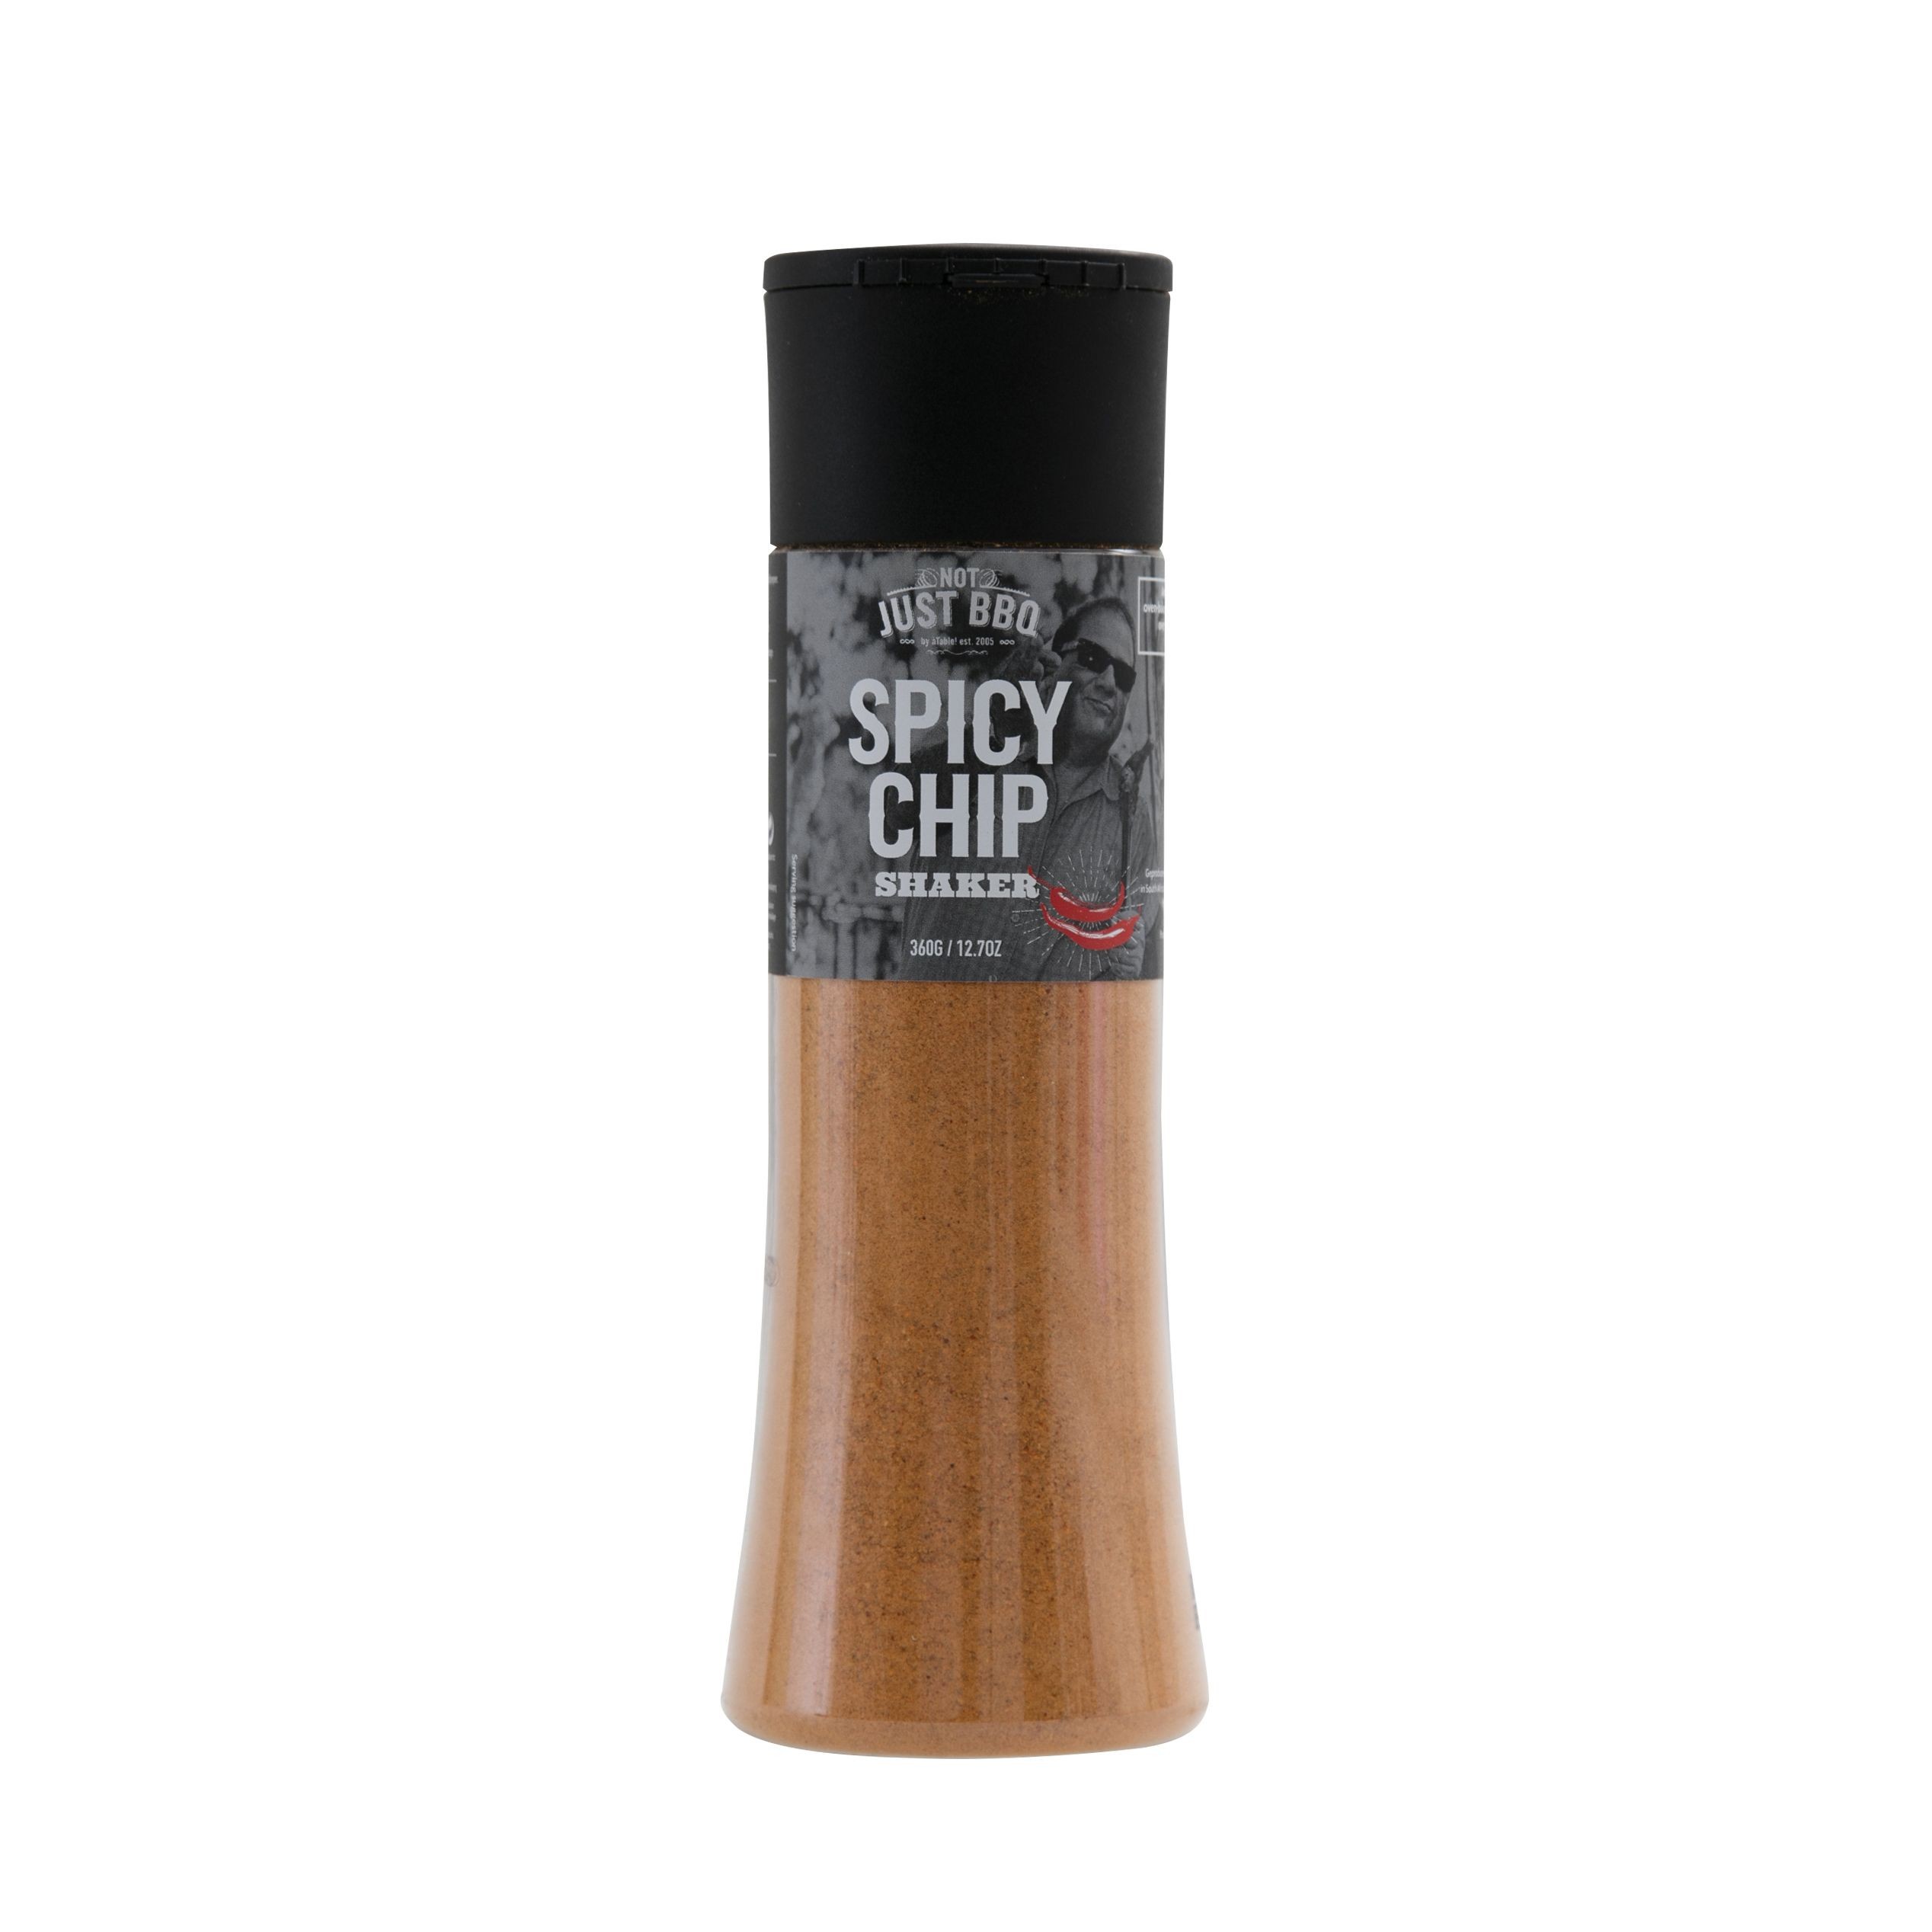 Spicy Chip Shaker 360g